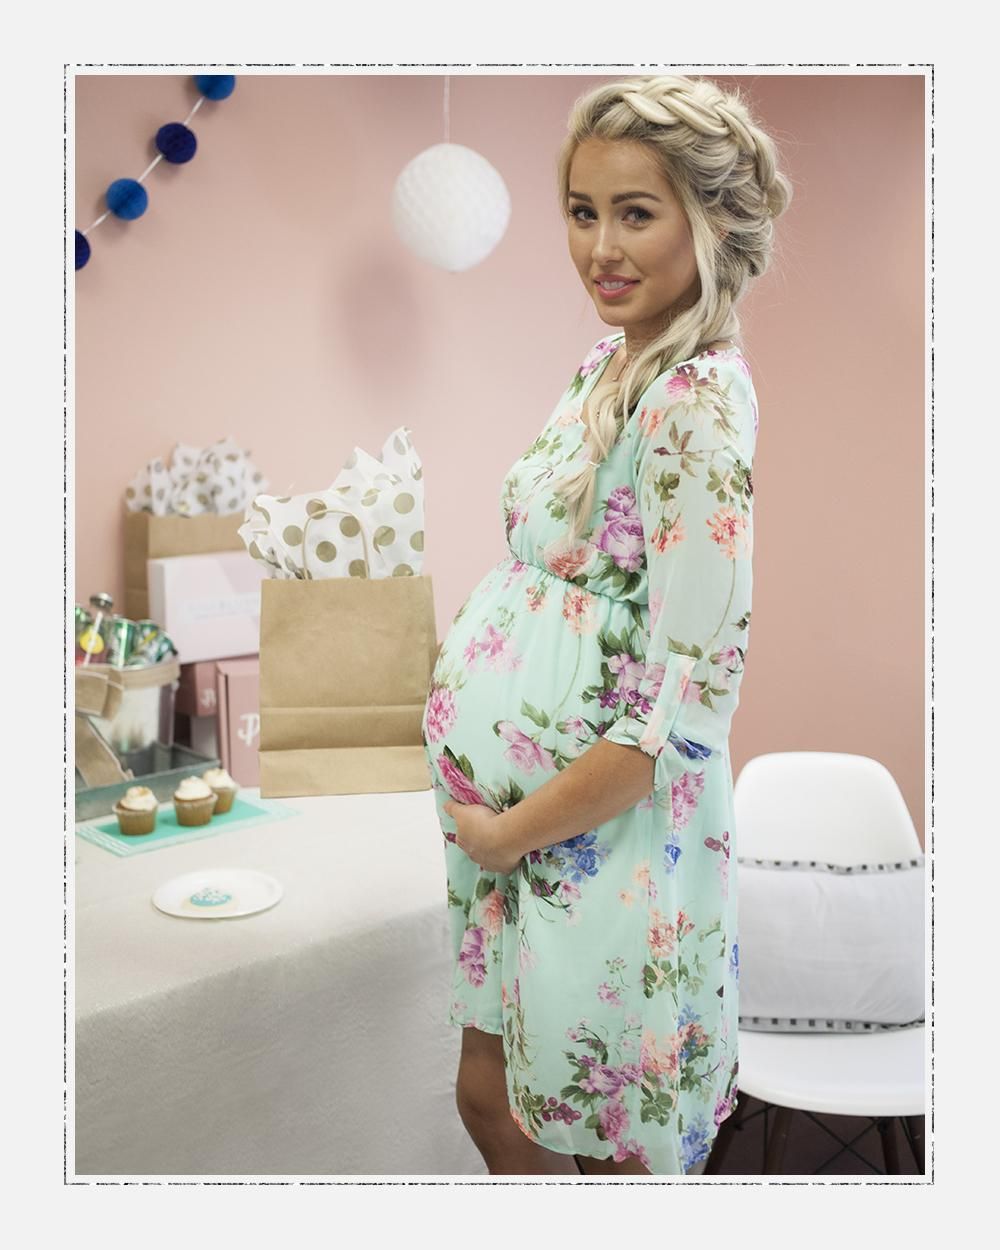 Full Size of Baby Shower:what To Wear To A Baby Shower In October Mom And Dad Baby Shower Outfits Petite Maternity Dresses For Baby Shower Maternity Blouses For Baby Shower Maternity Gown Style Maternity Stores Near Me Plus Size Maternity Clothes Cheap Maternity Jeans